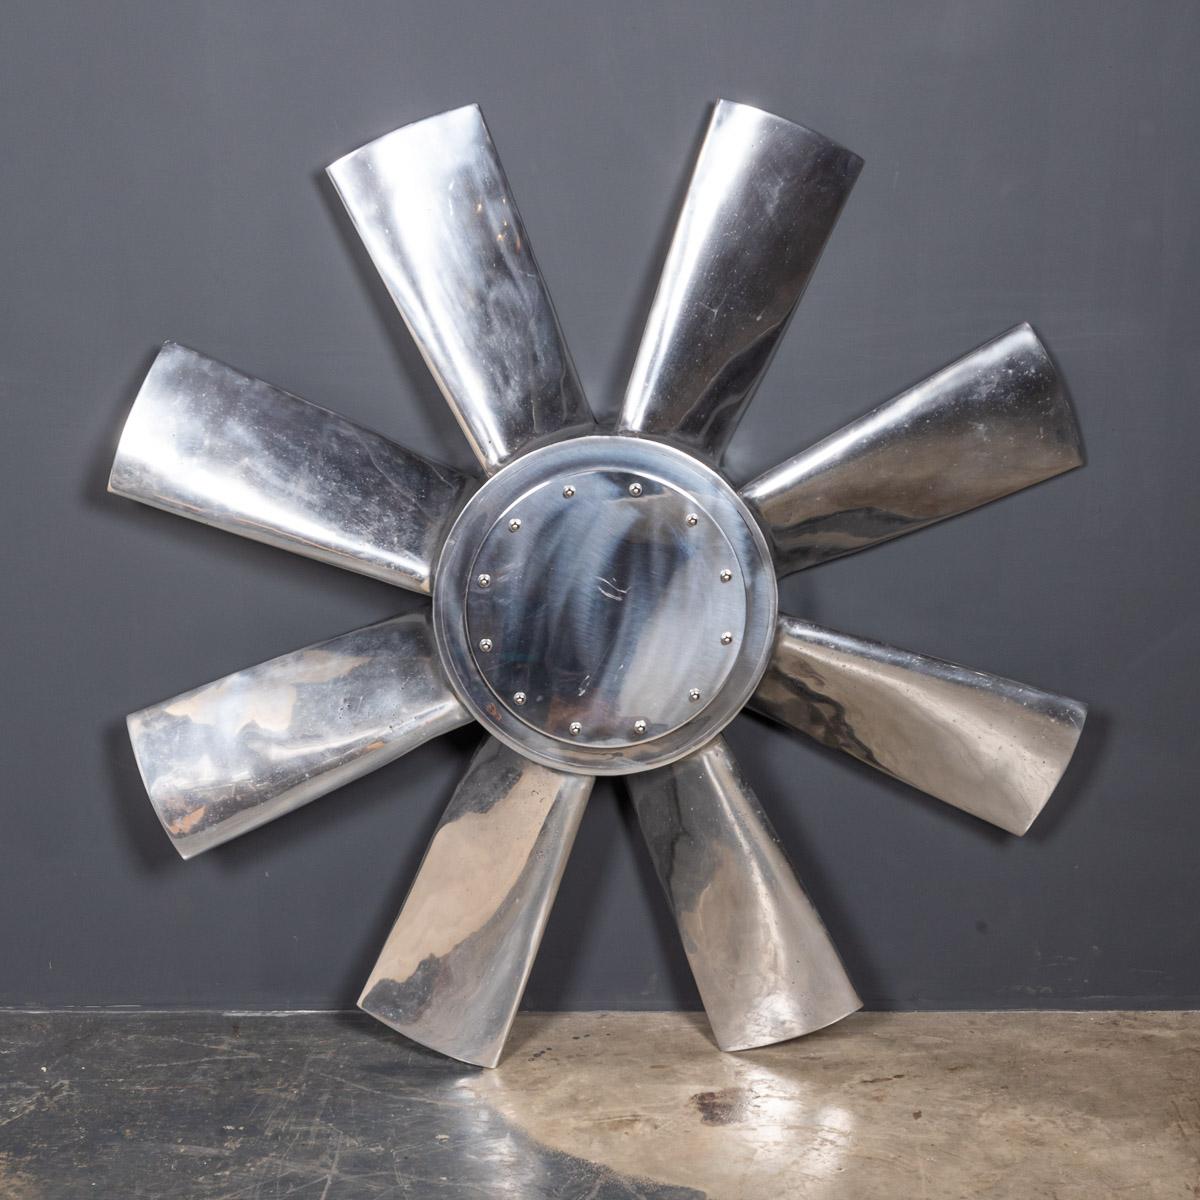 A stunning mid-20th century large aluminium Industrial intake fan blade, polished to an almost mirror finish. This would be an imposing addition to any